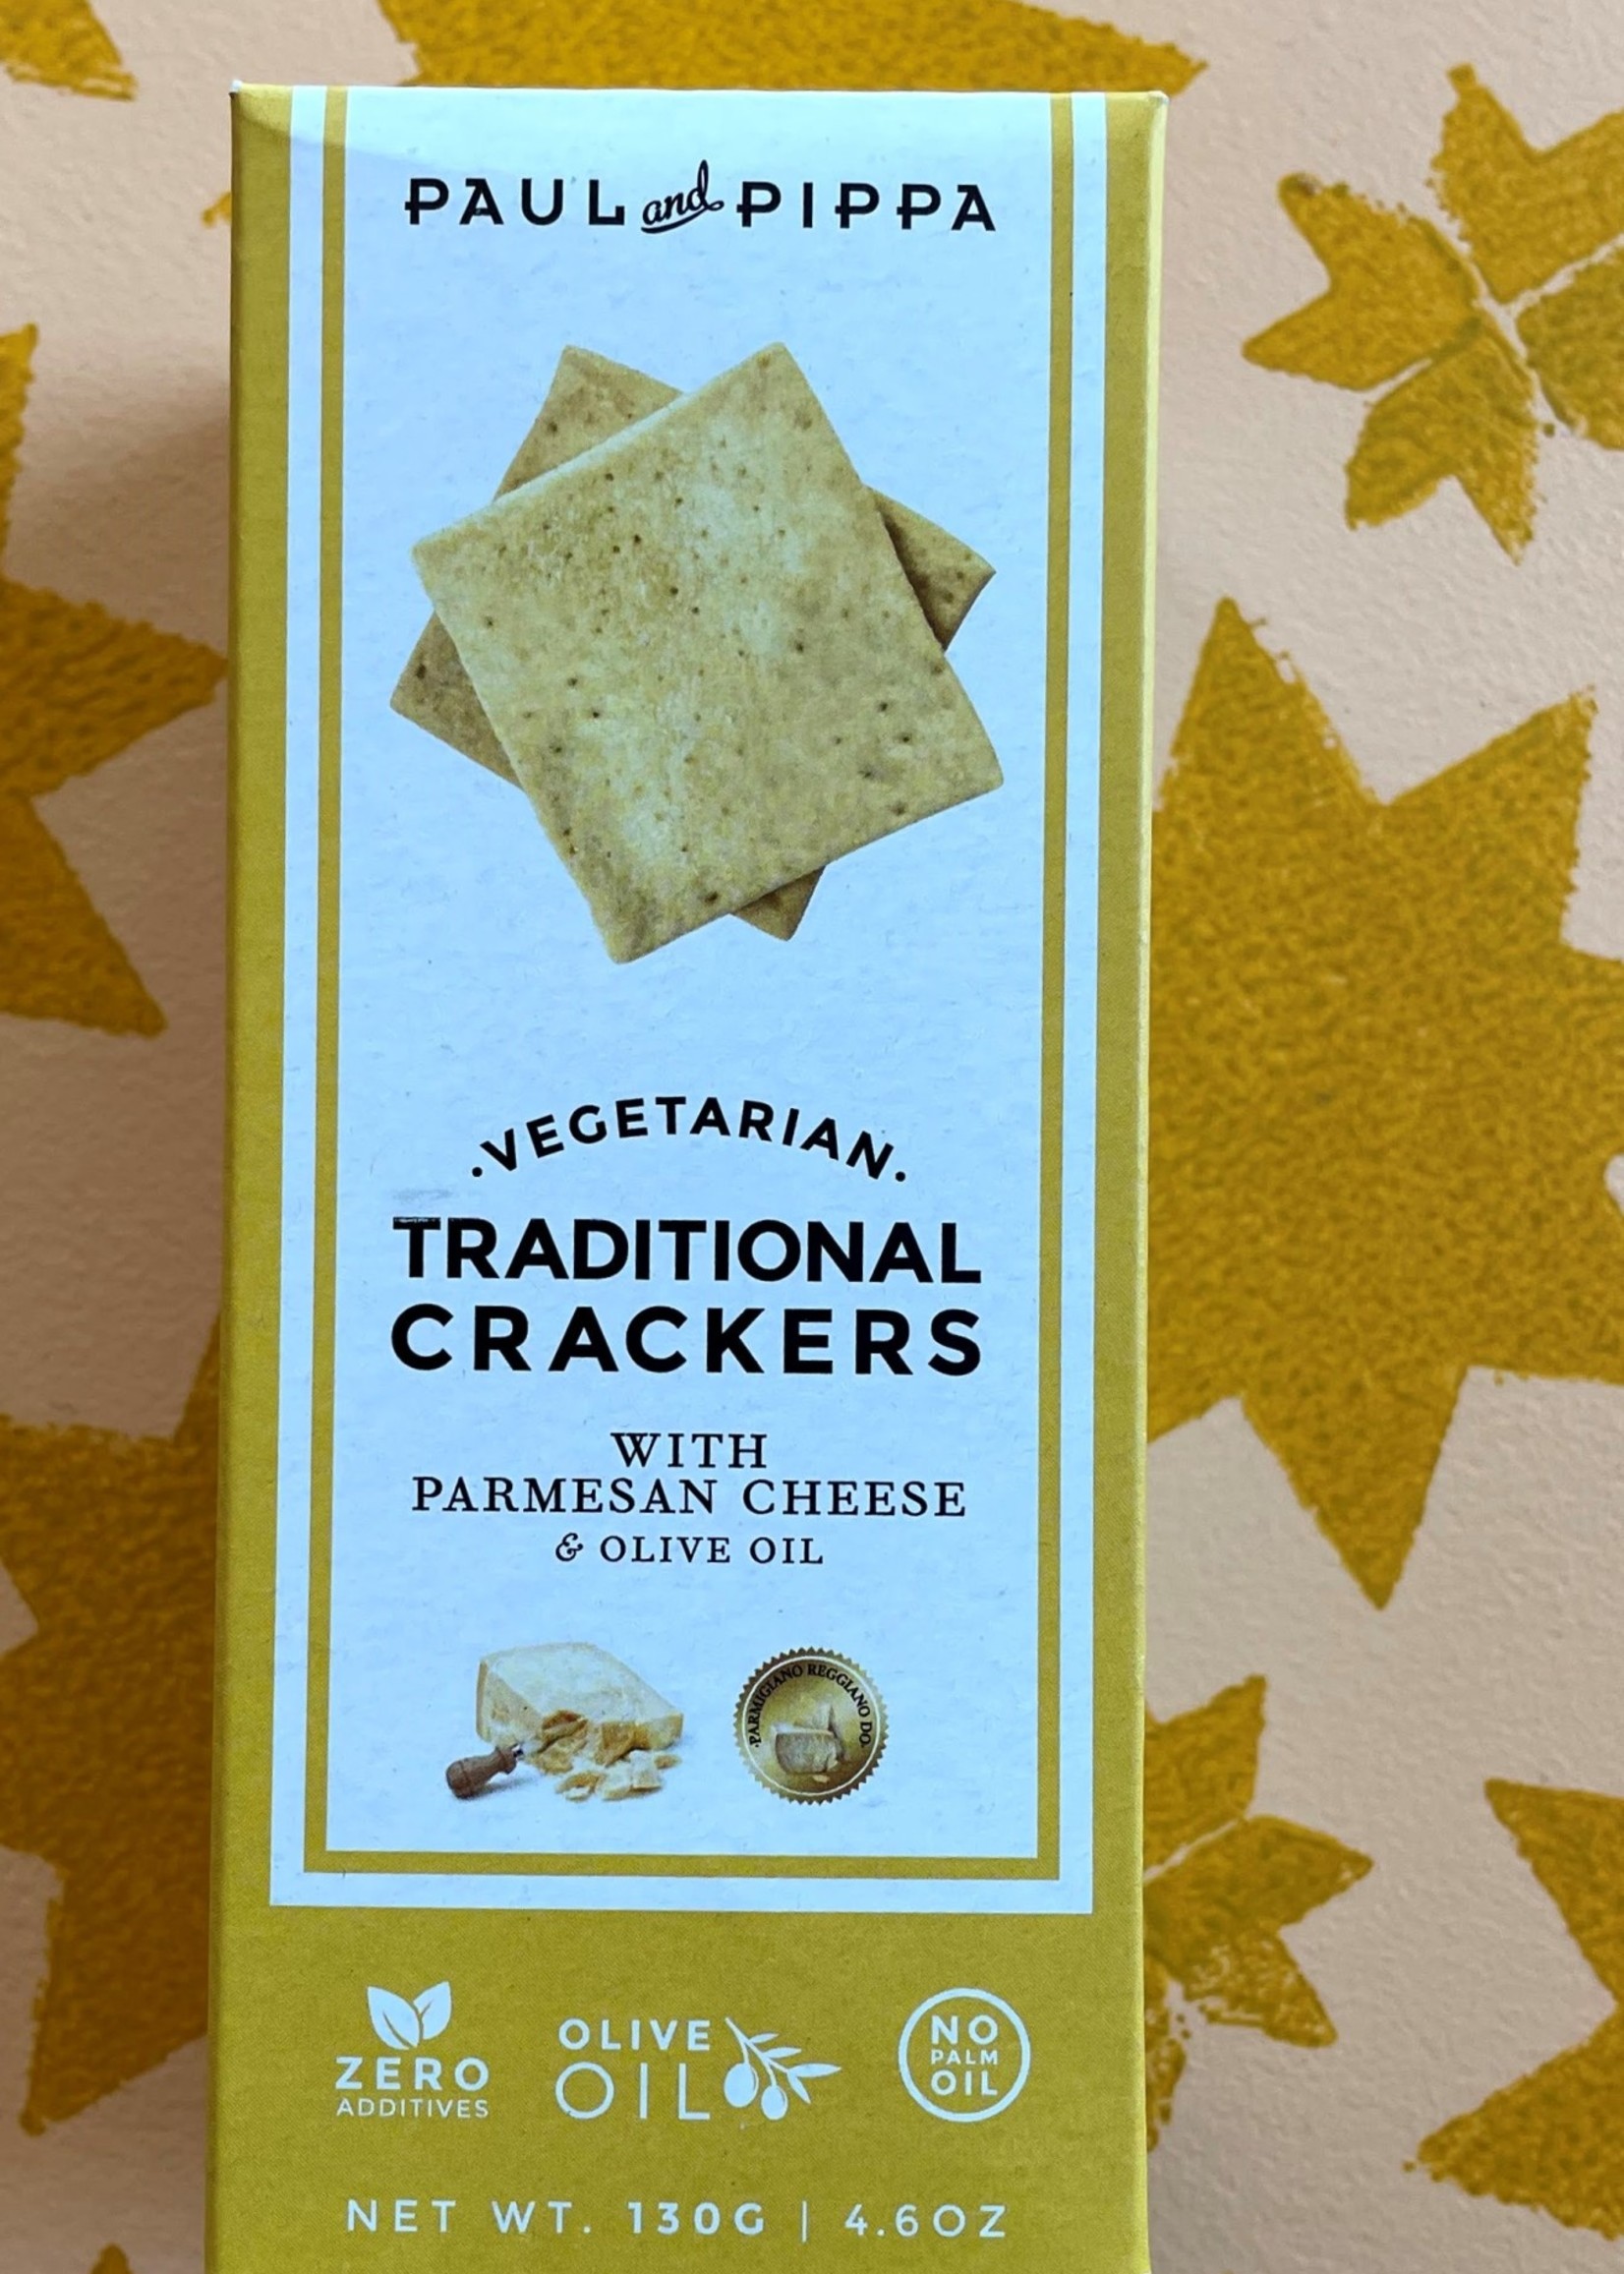 Paul & Pippa Crackers with Parmesan Cheese and Olive Oil 4.6oz (130g)